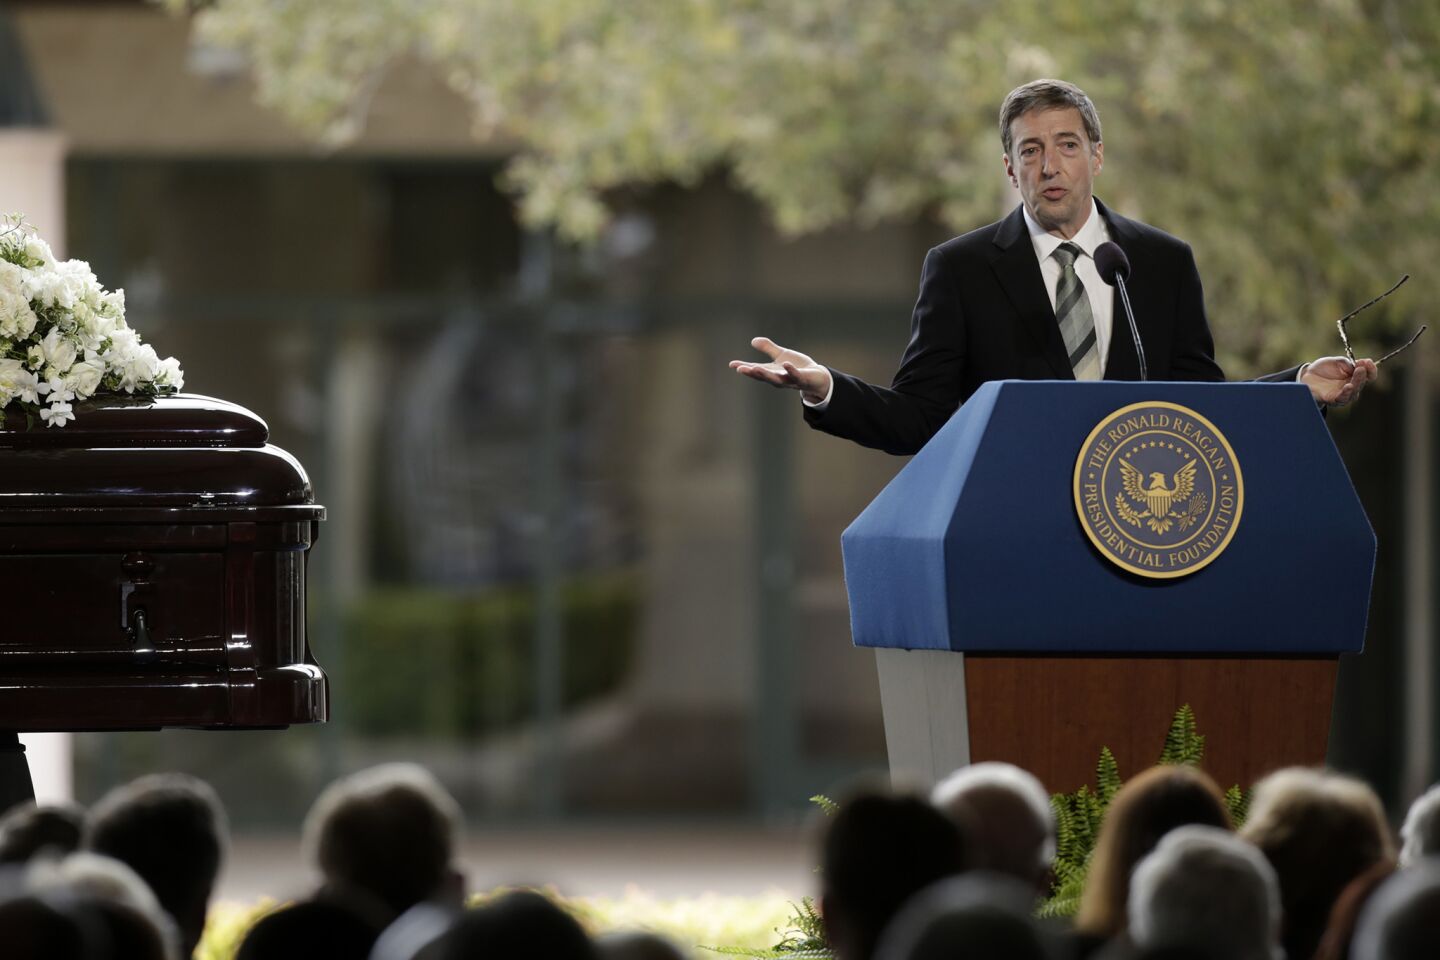 Ron Reagan speaks at the funeral of his mother and former First Lady Nancy Reagan at the Ronald Reagan Presidential Library in Simi Valley.